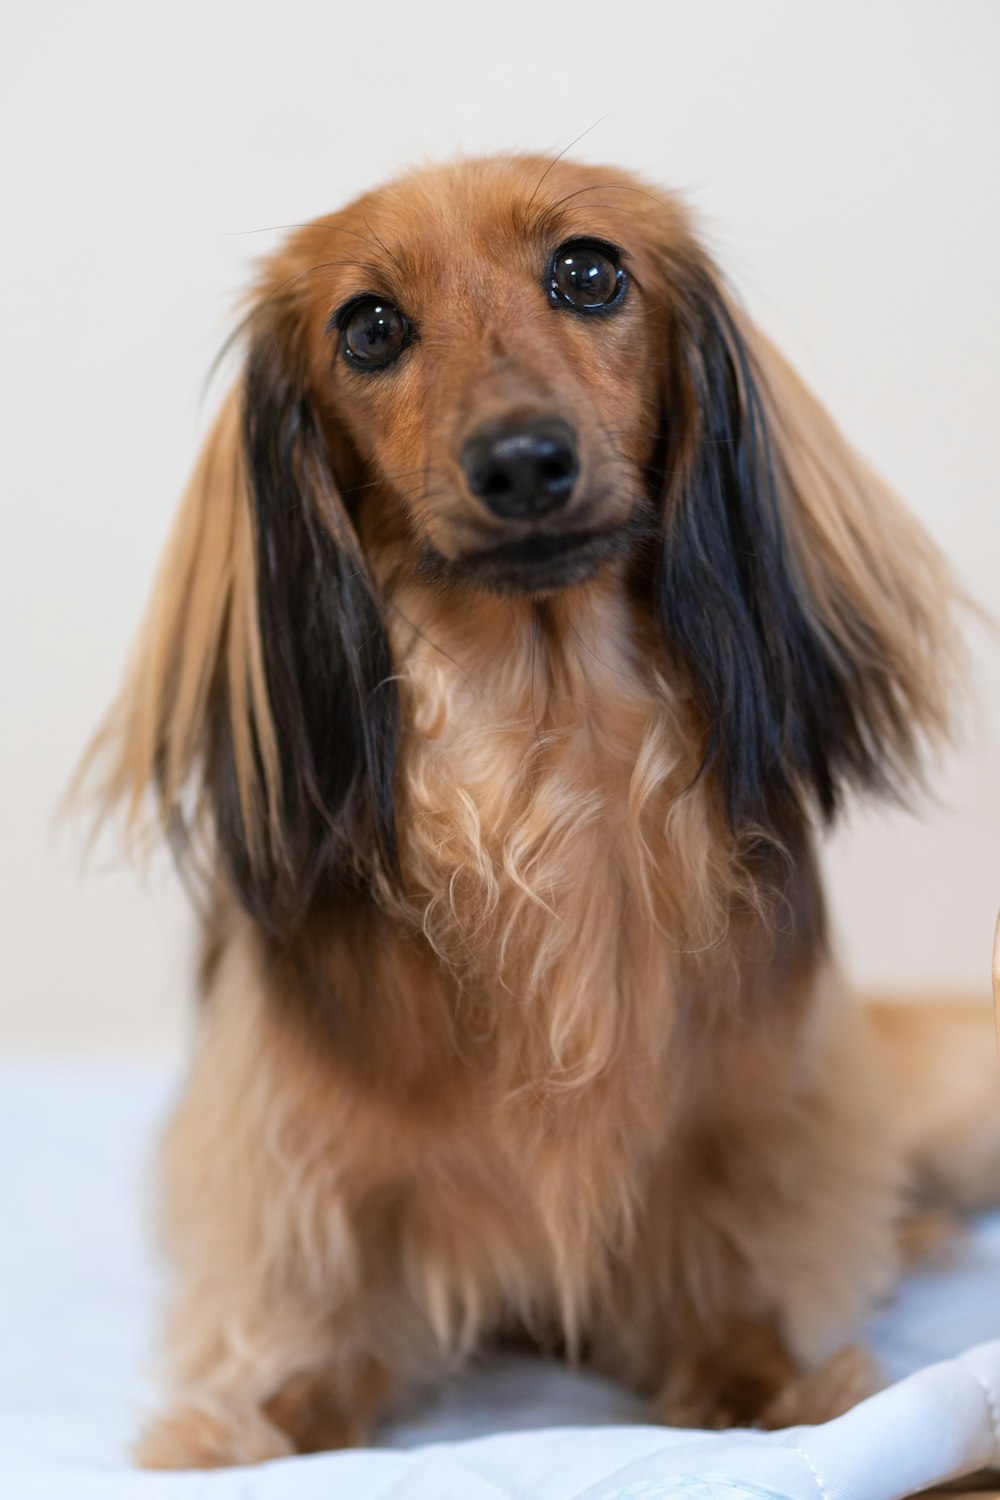 brown and black long coated small dog photo – Free Pet Image on Unsplash